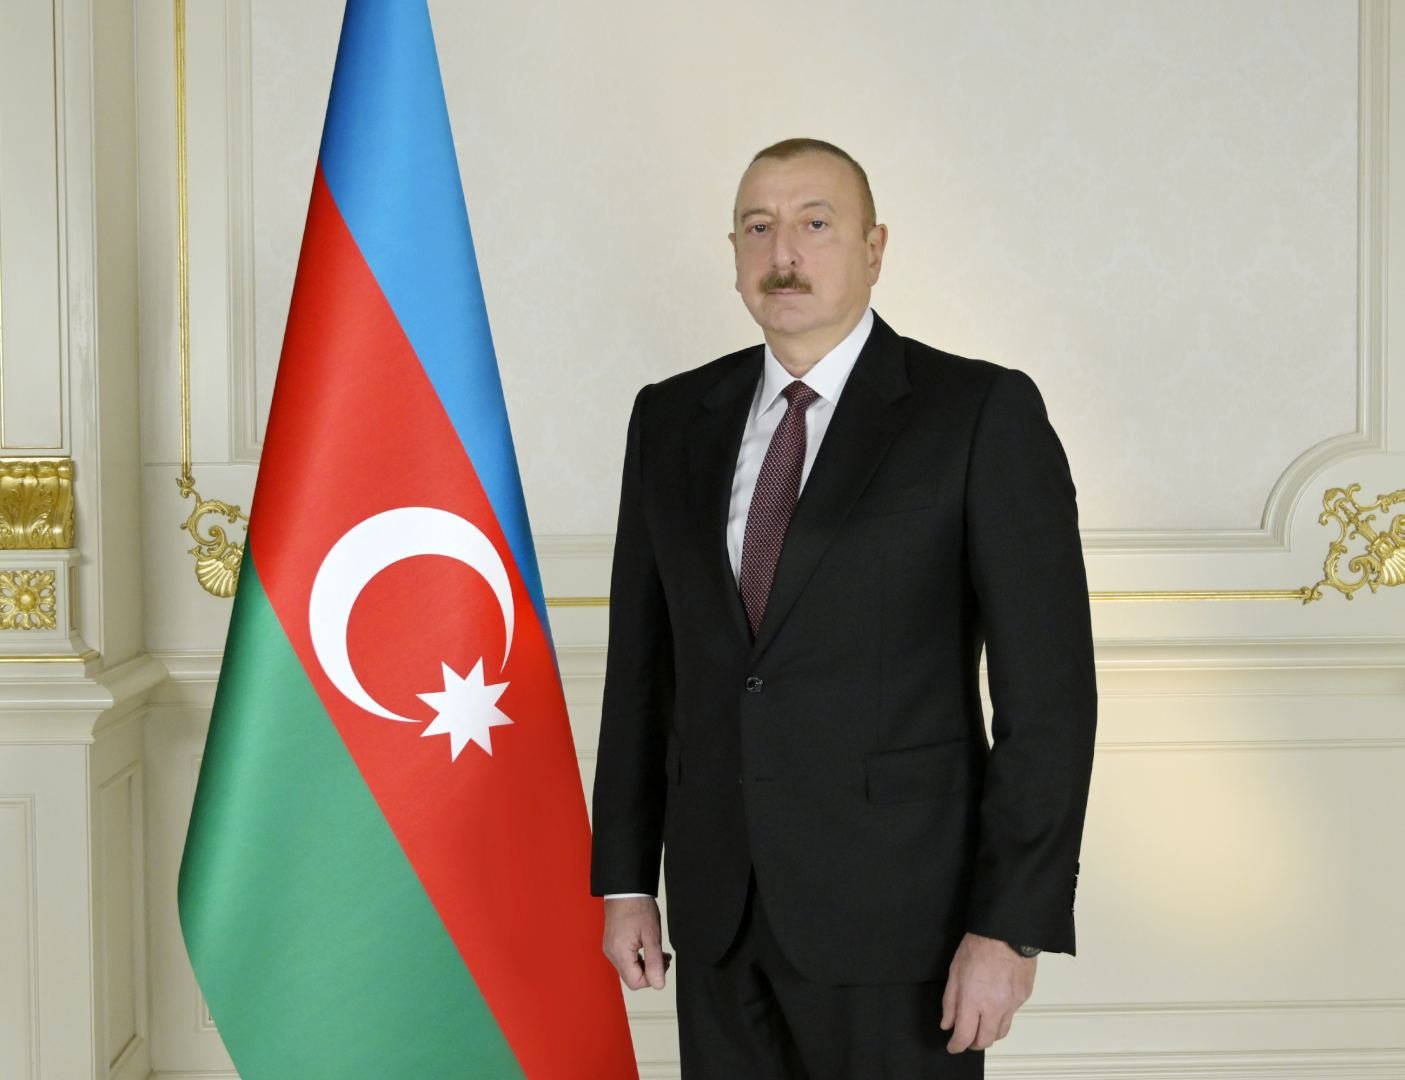 President Ilham Aliyev concludes his visit to Russia